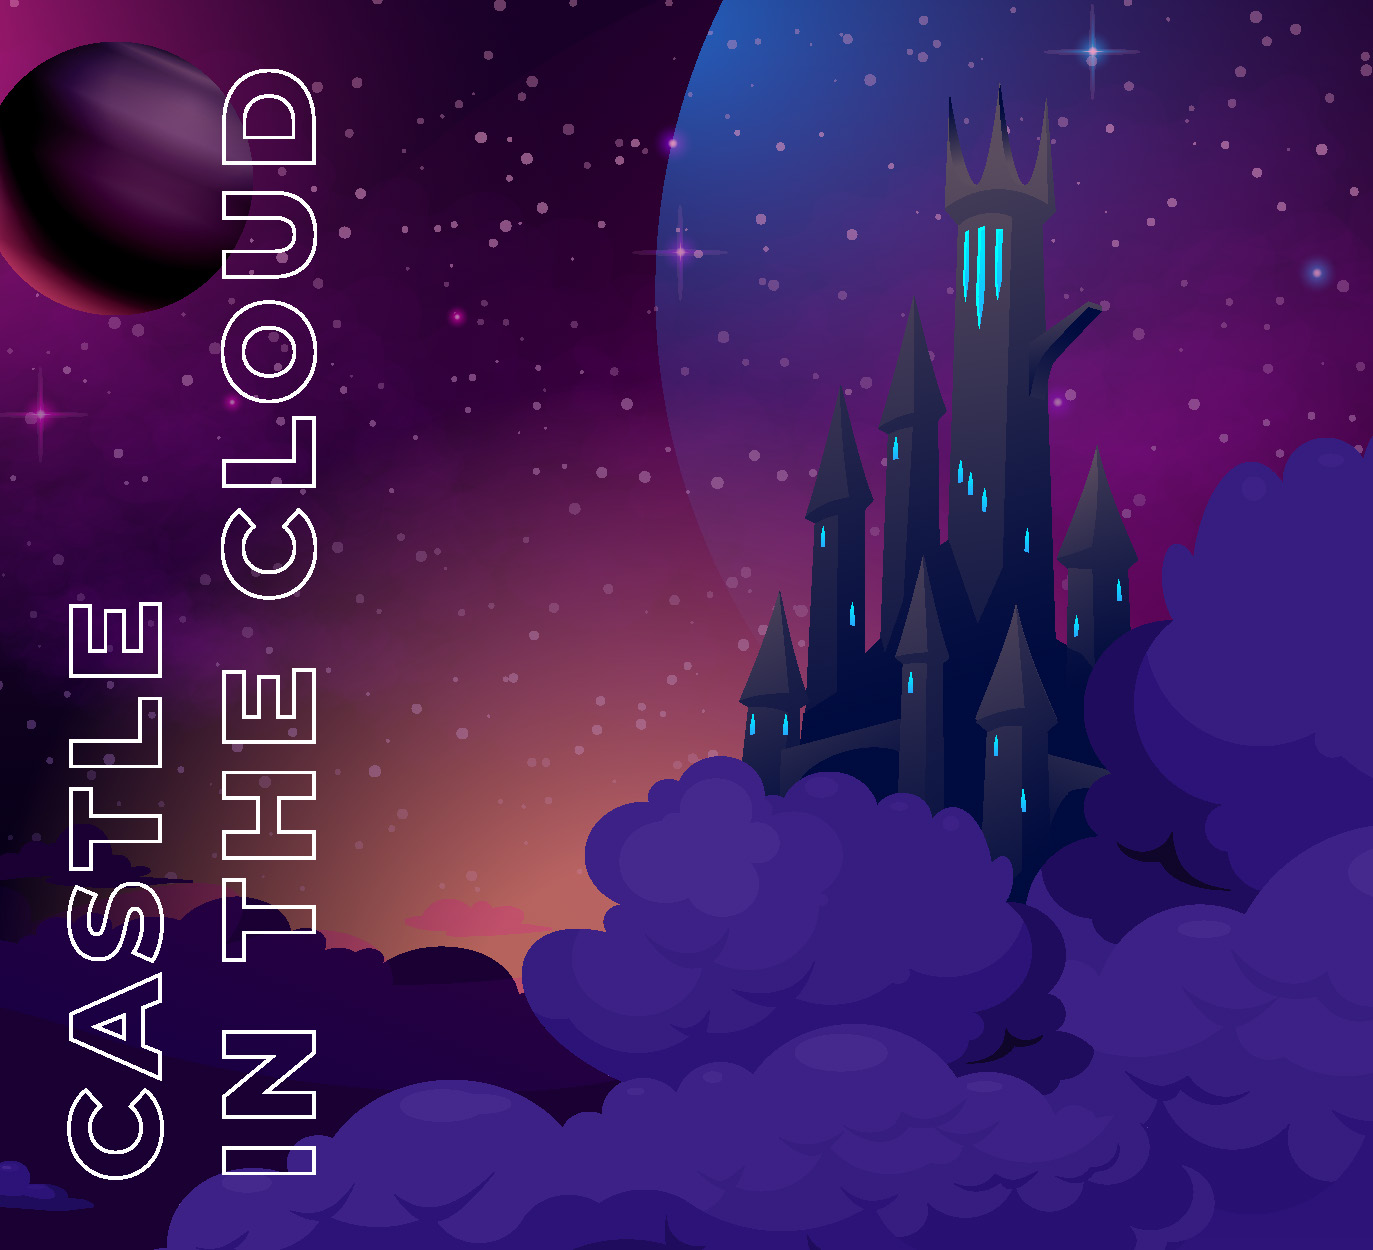 Castle in the clouds _Page_1